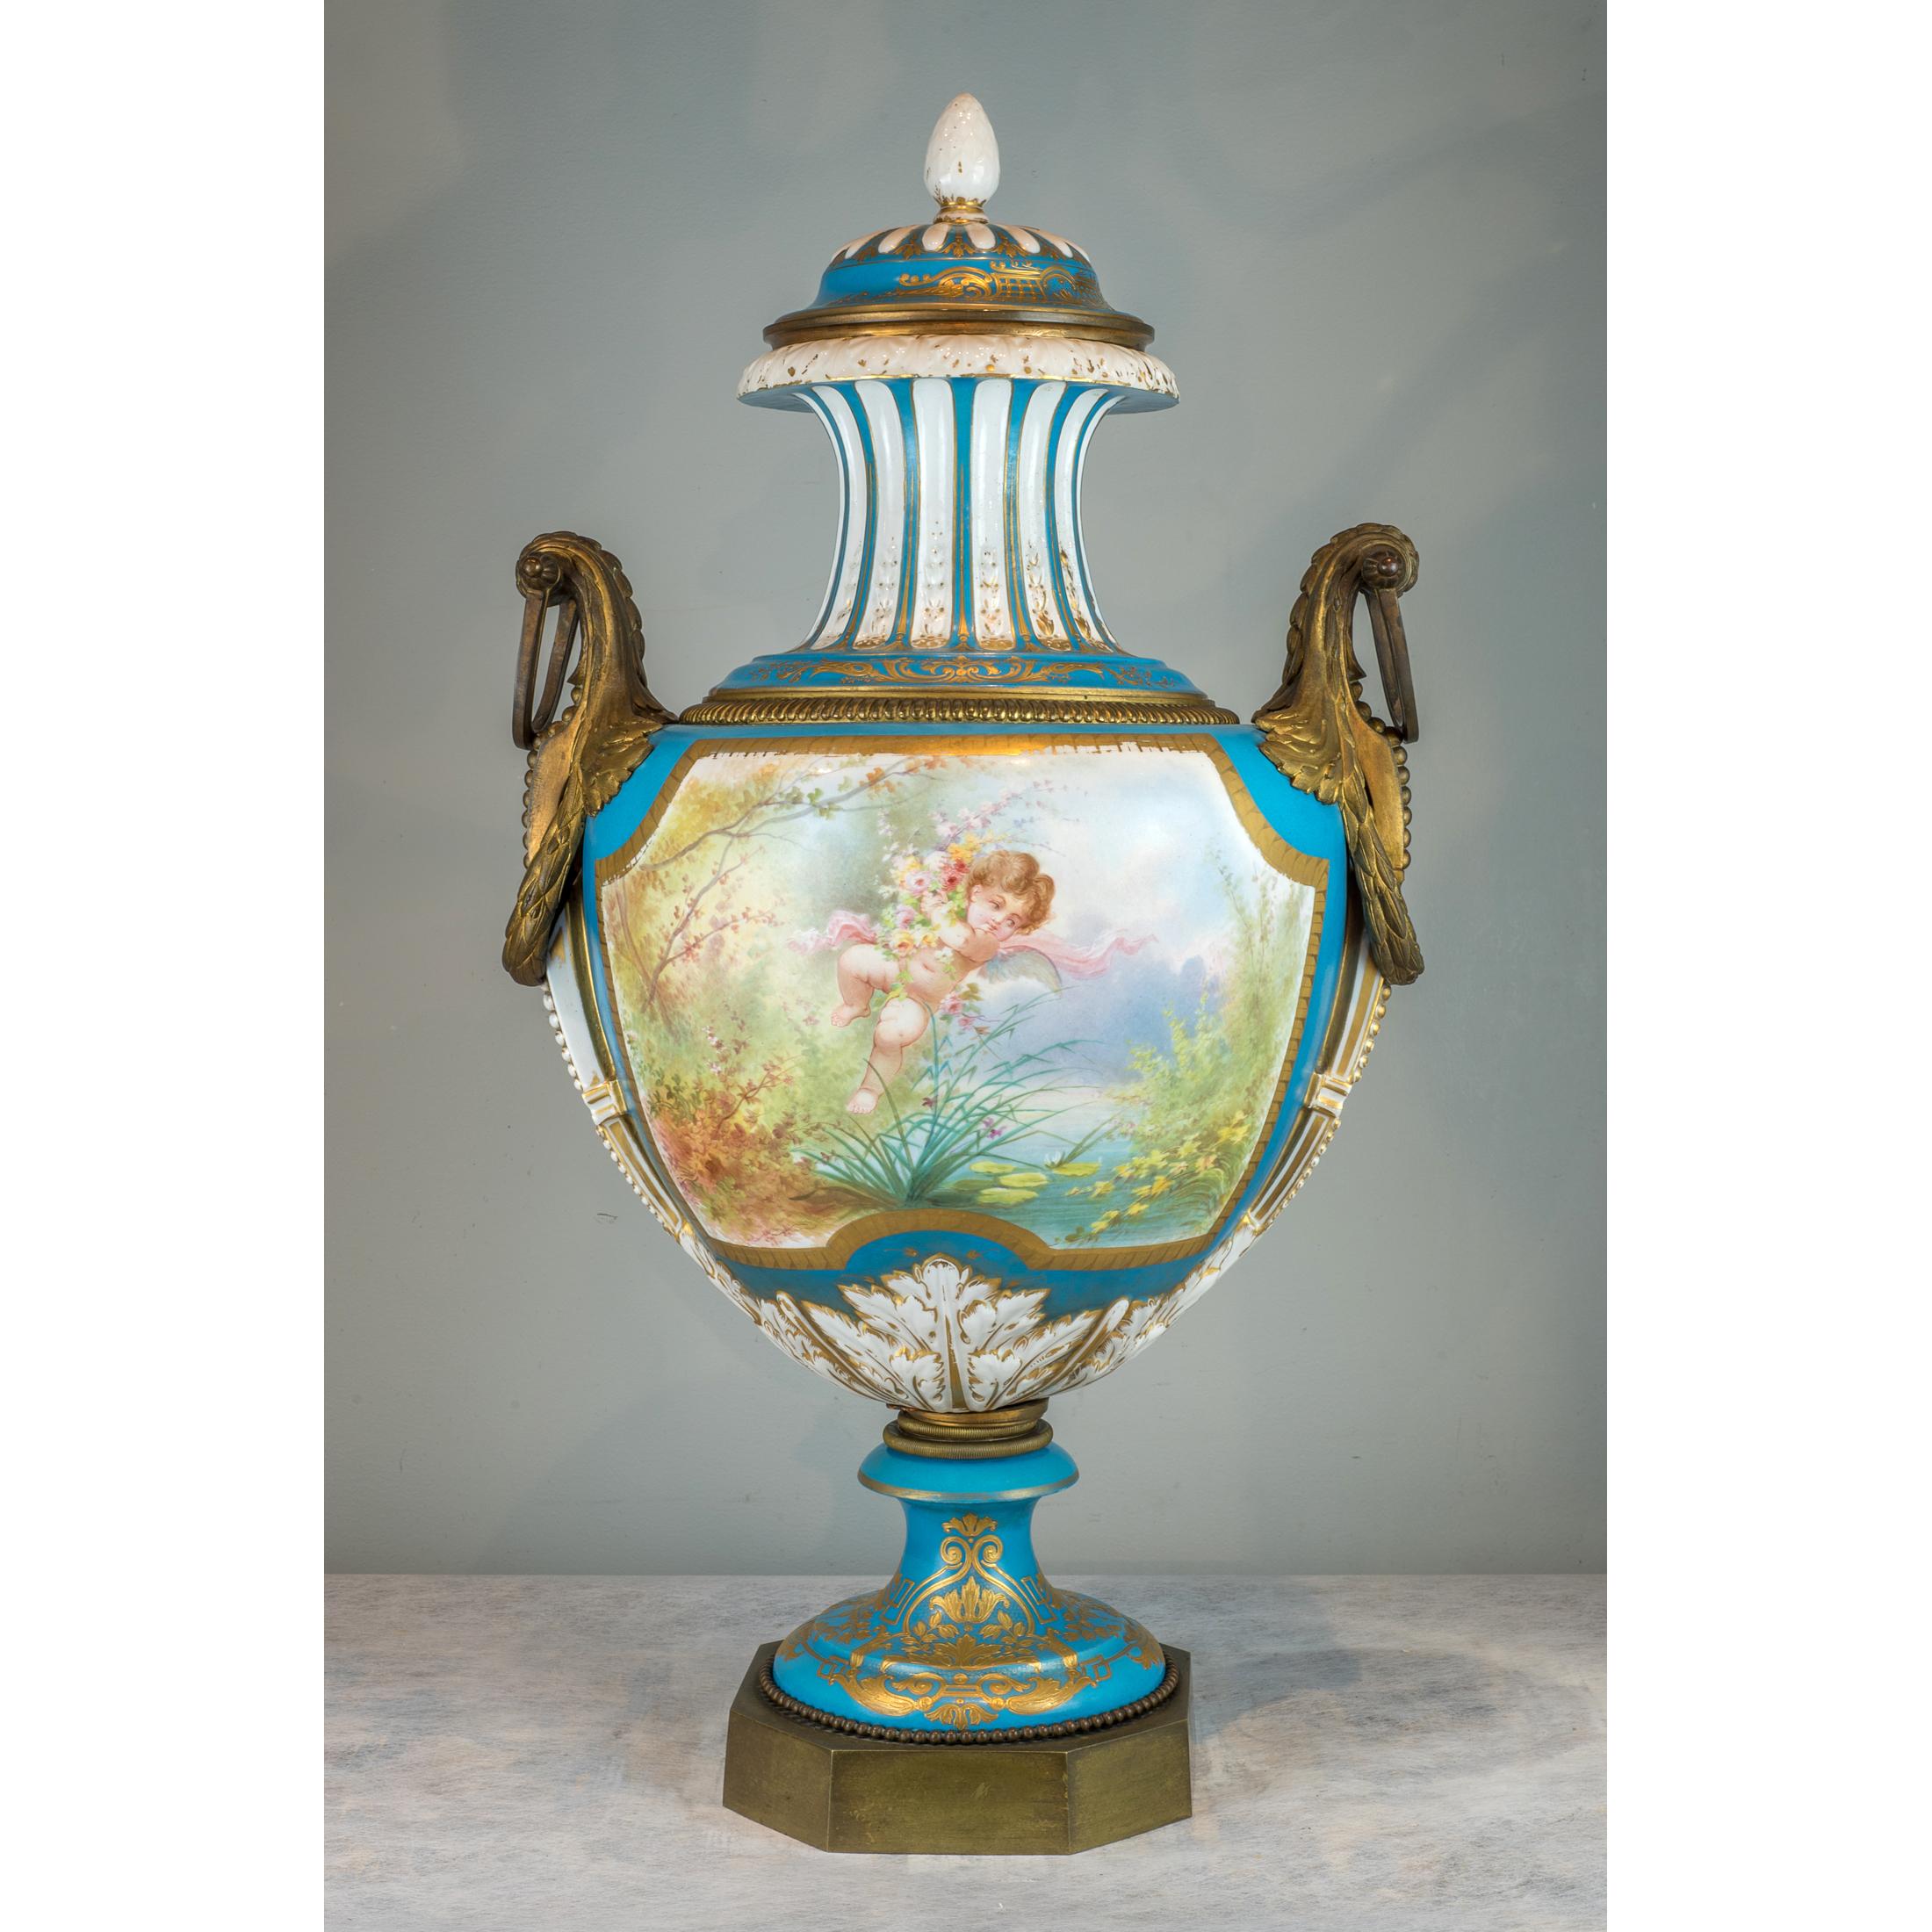 A fine ormolu-mounted Sèvres style turquoise-ground vase and cover


The finely painted spurious blue interlaced signed ‘A Collot’ with a seated maiden emblematic of spring attended by two putti, the reverse with a putto holding an emblem of his